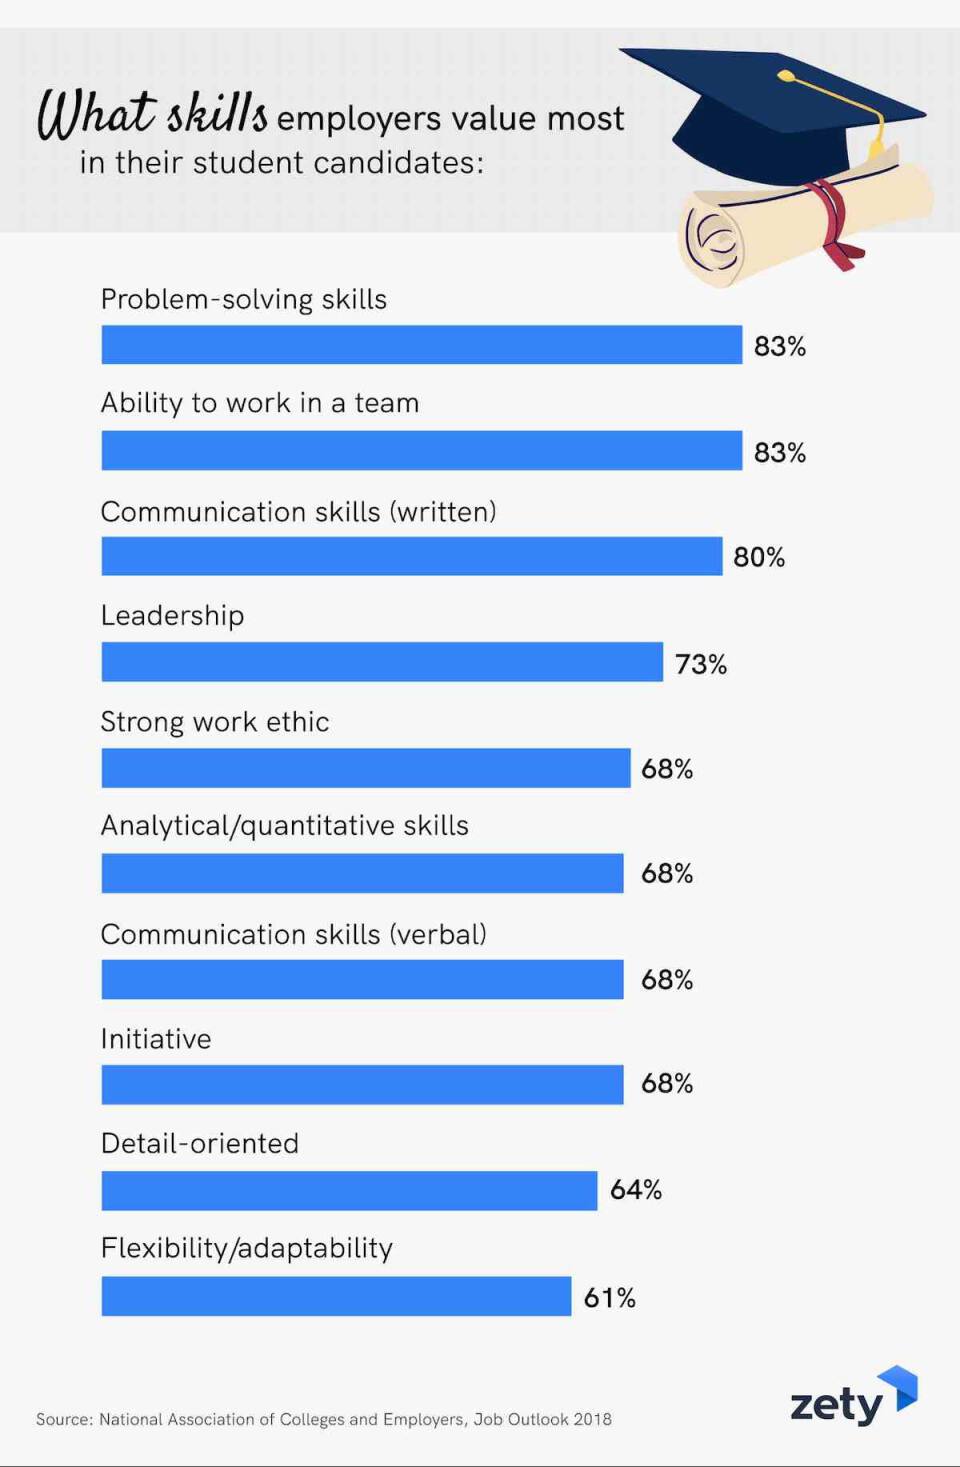 What skills employers value most in their student candidates